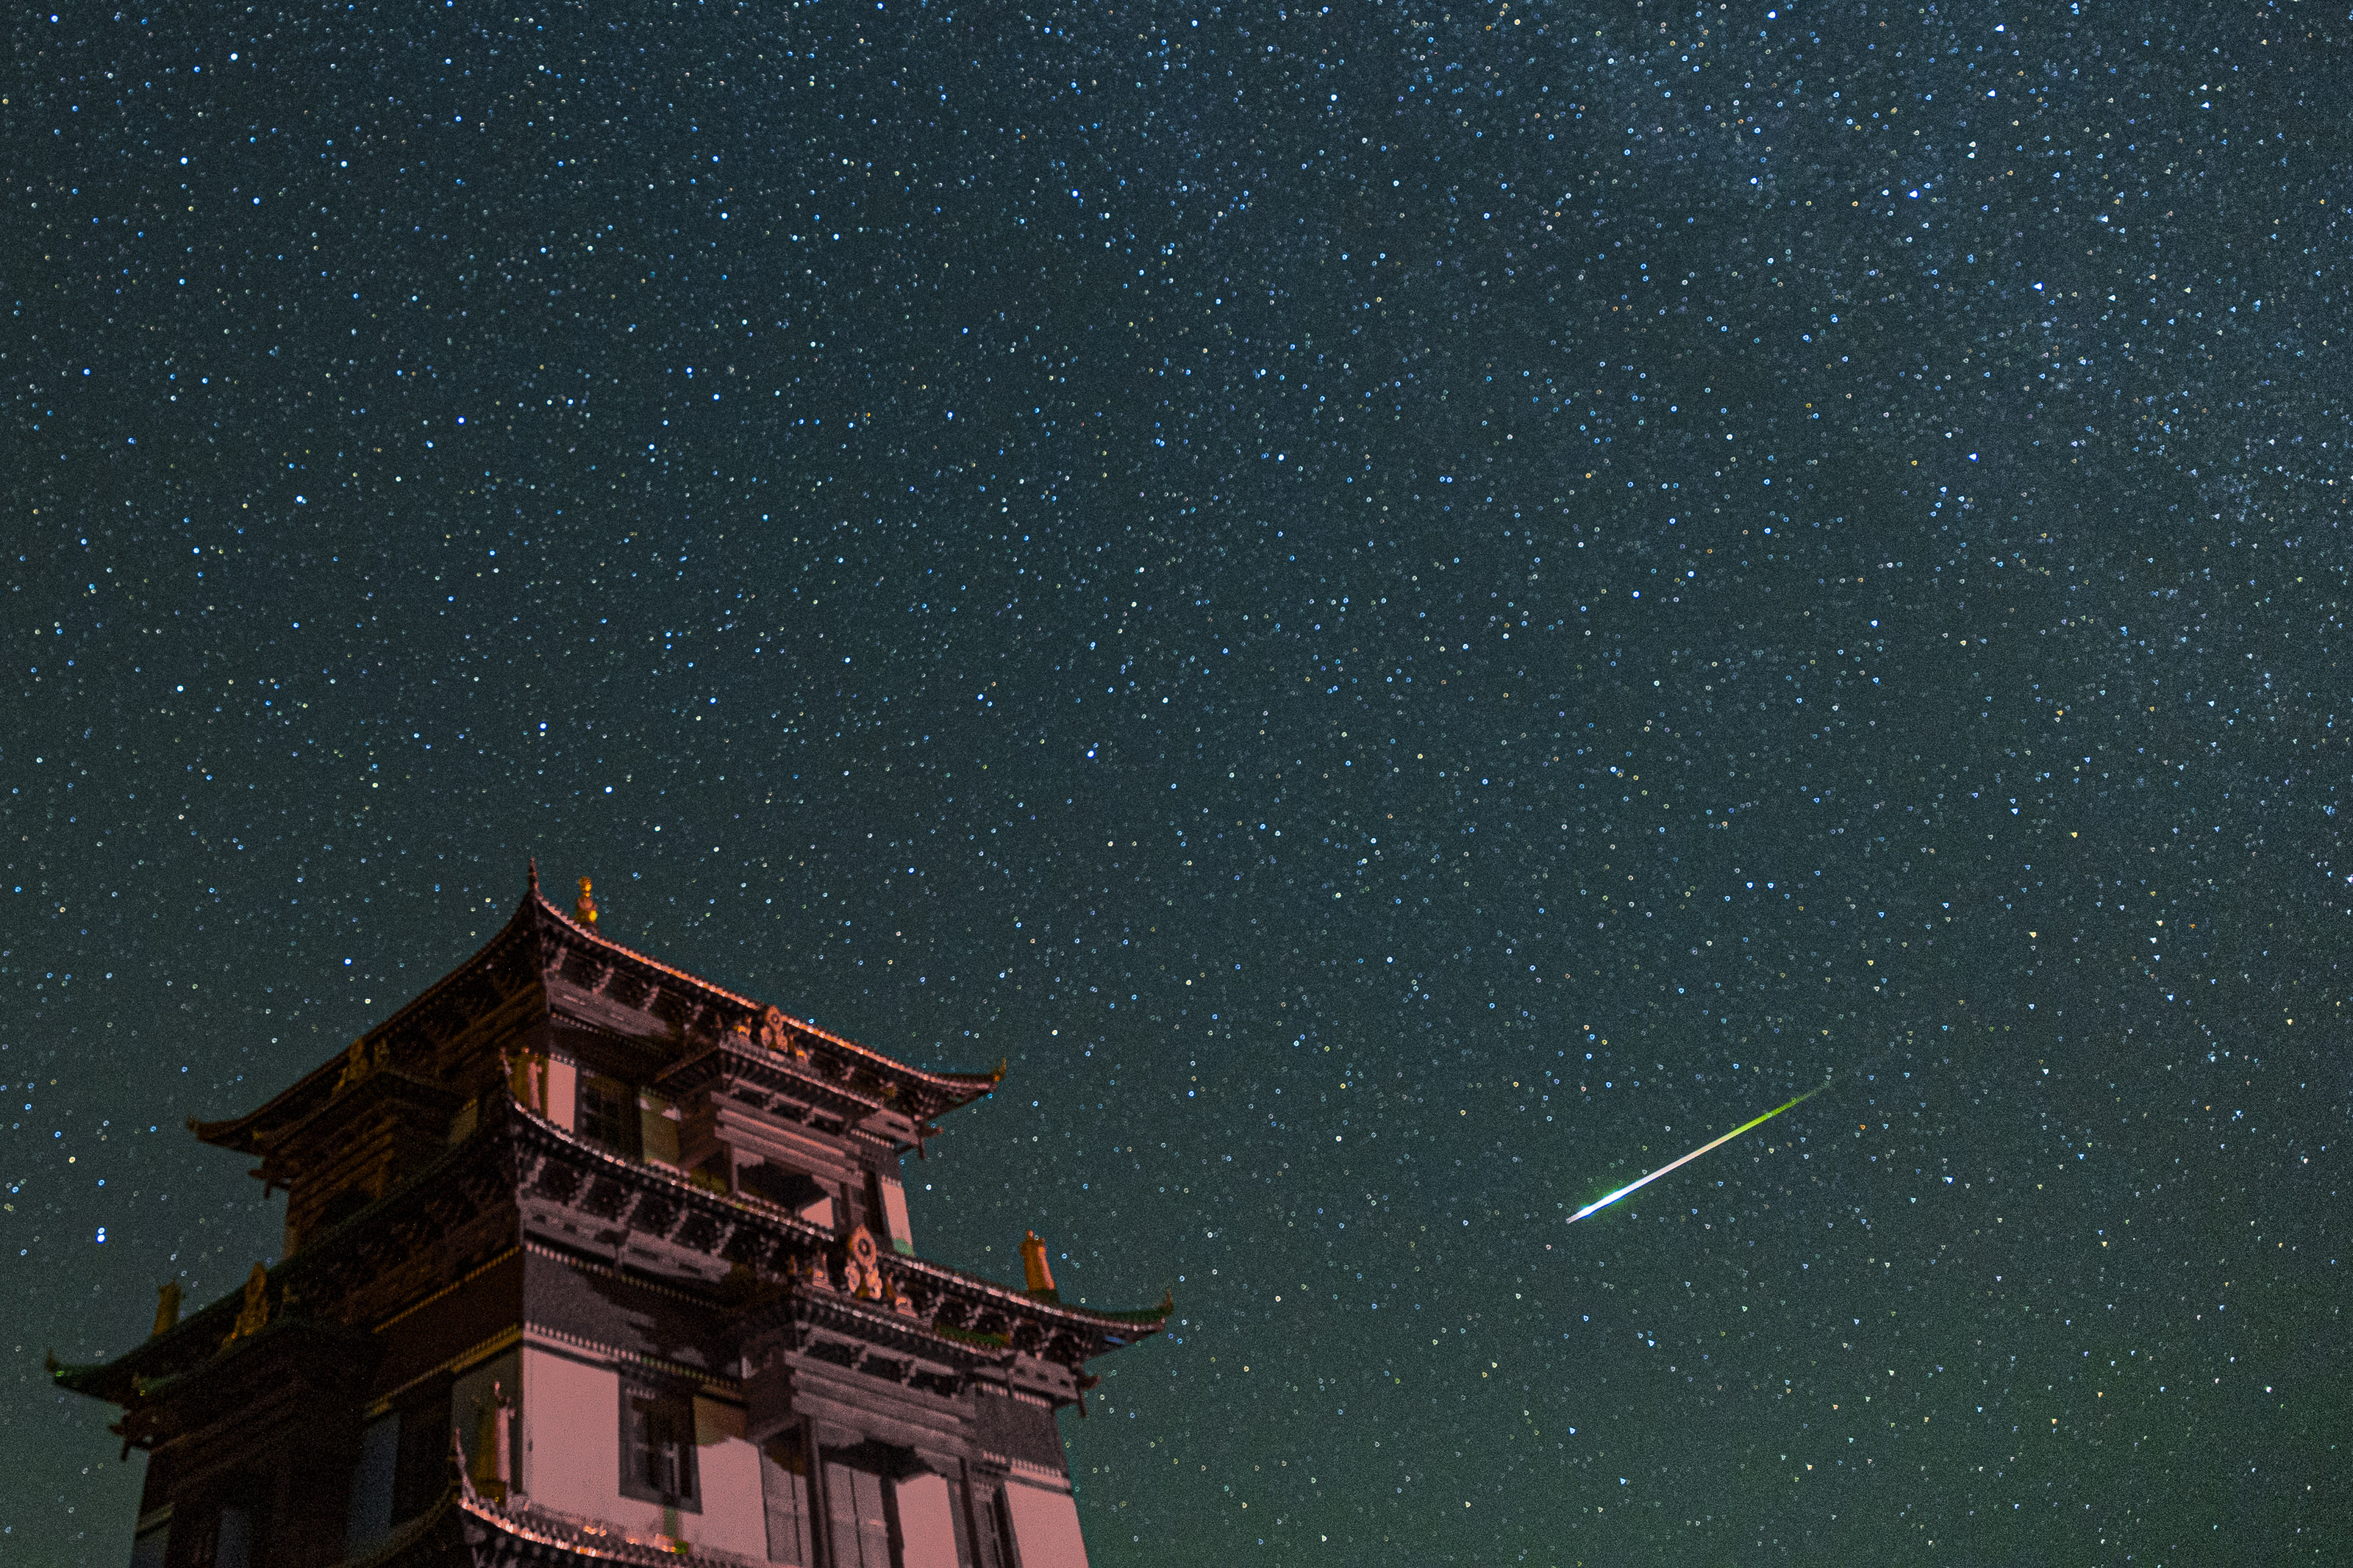 A large building to the left and a bright green-white Perseid meteor in the star-filled sky.